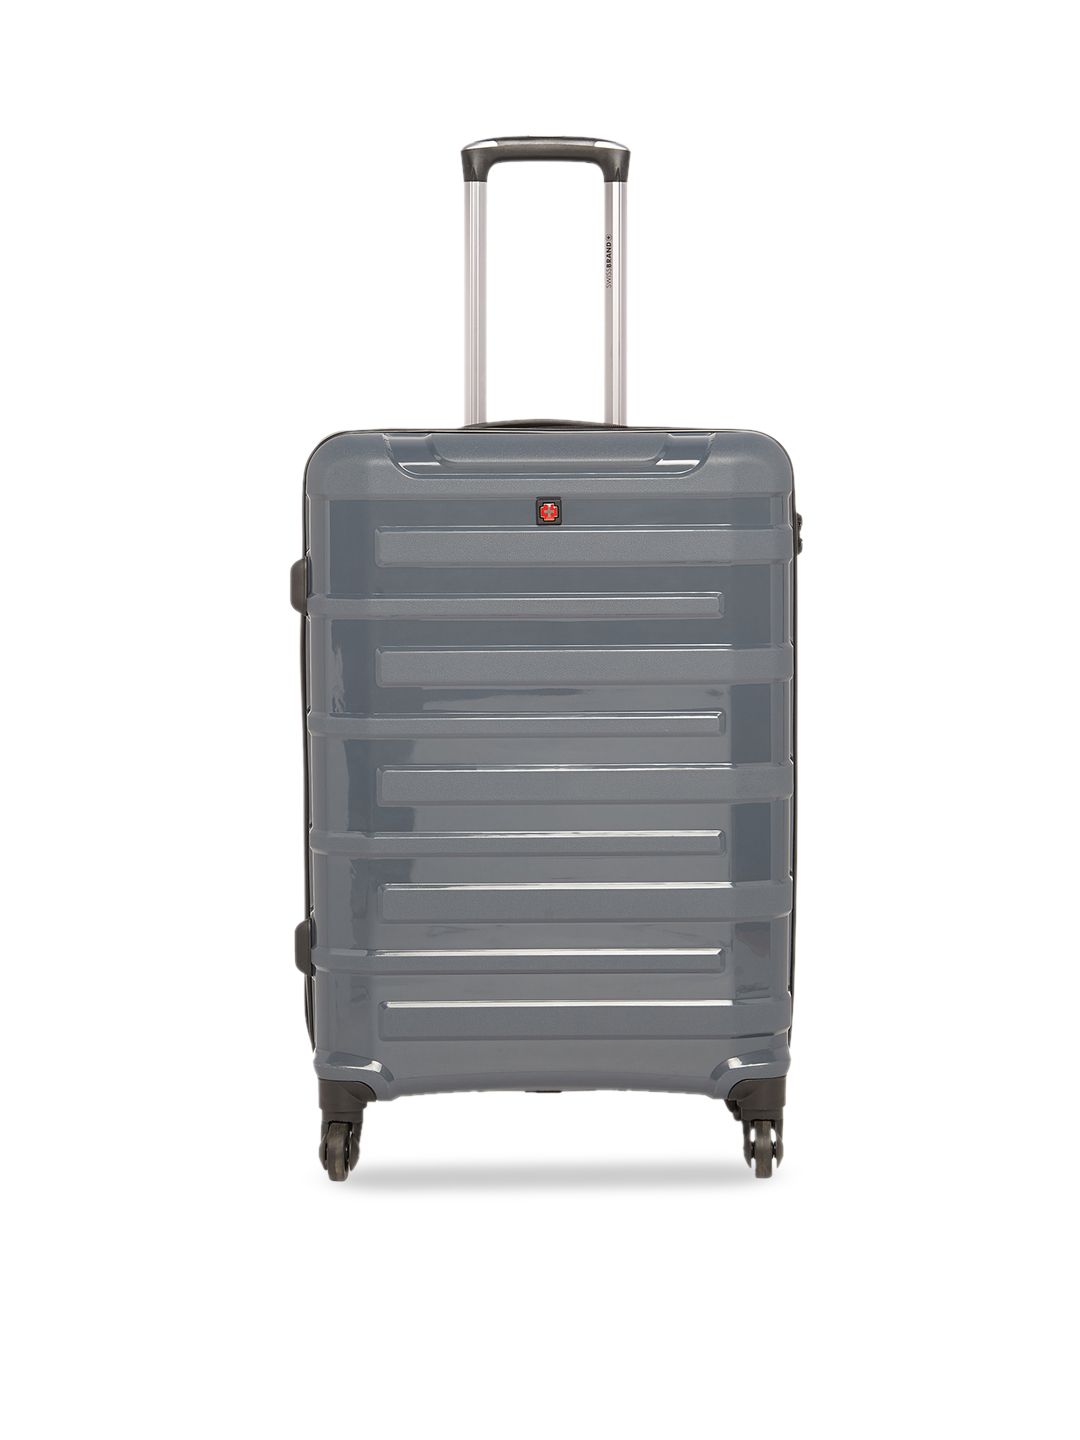 SWISS BRAND Unisex Grey & Black Colourblocked SION 360-Degree Rotation Hard-Sided Medium Trolley Suitcase Price in India